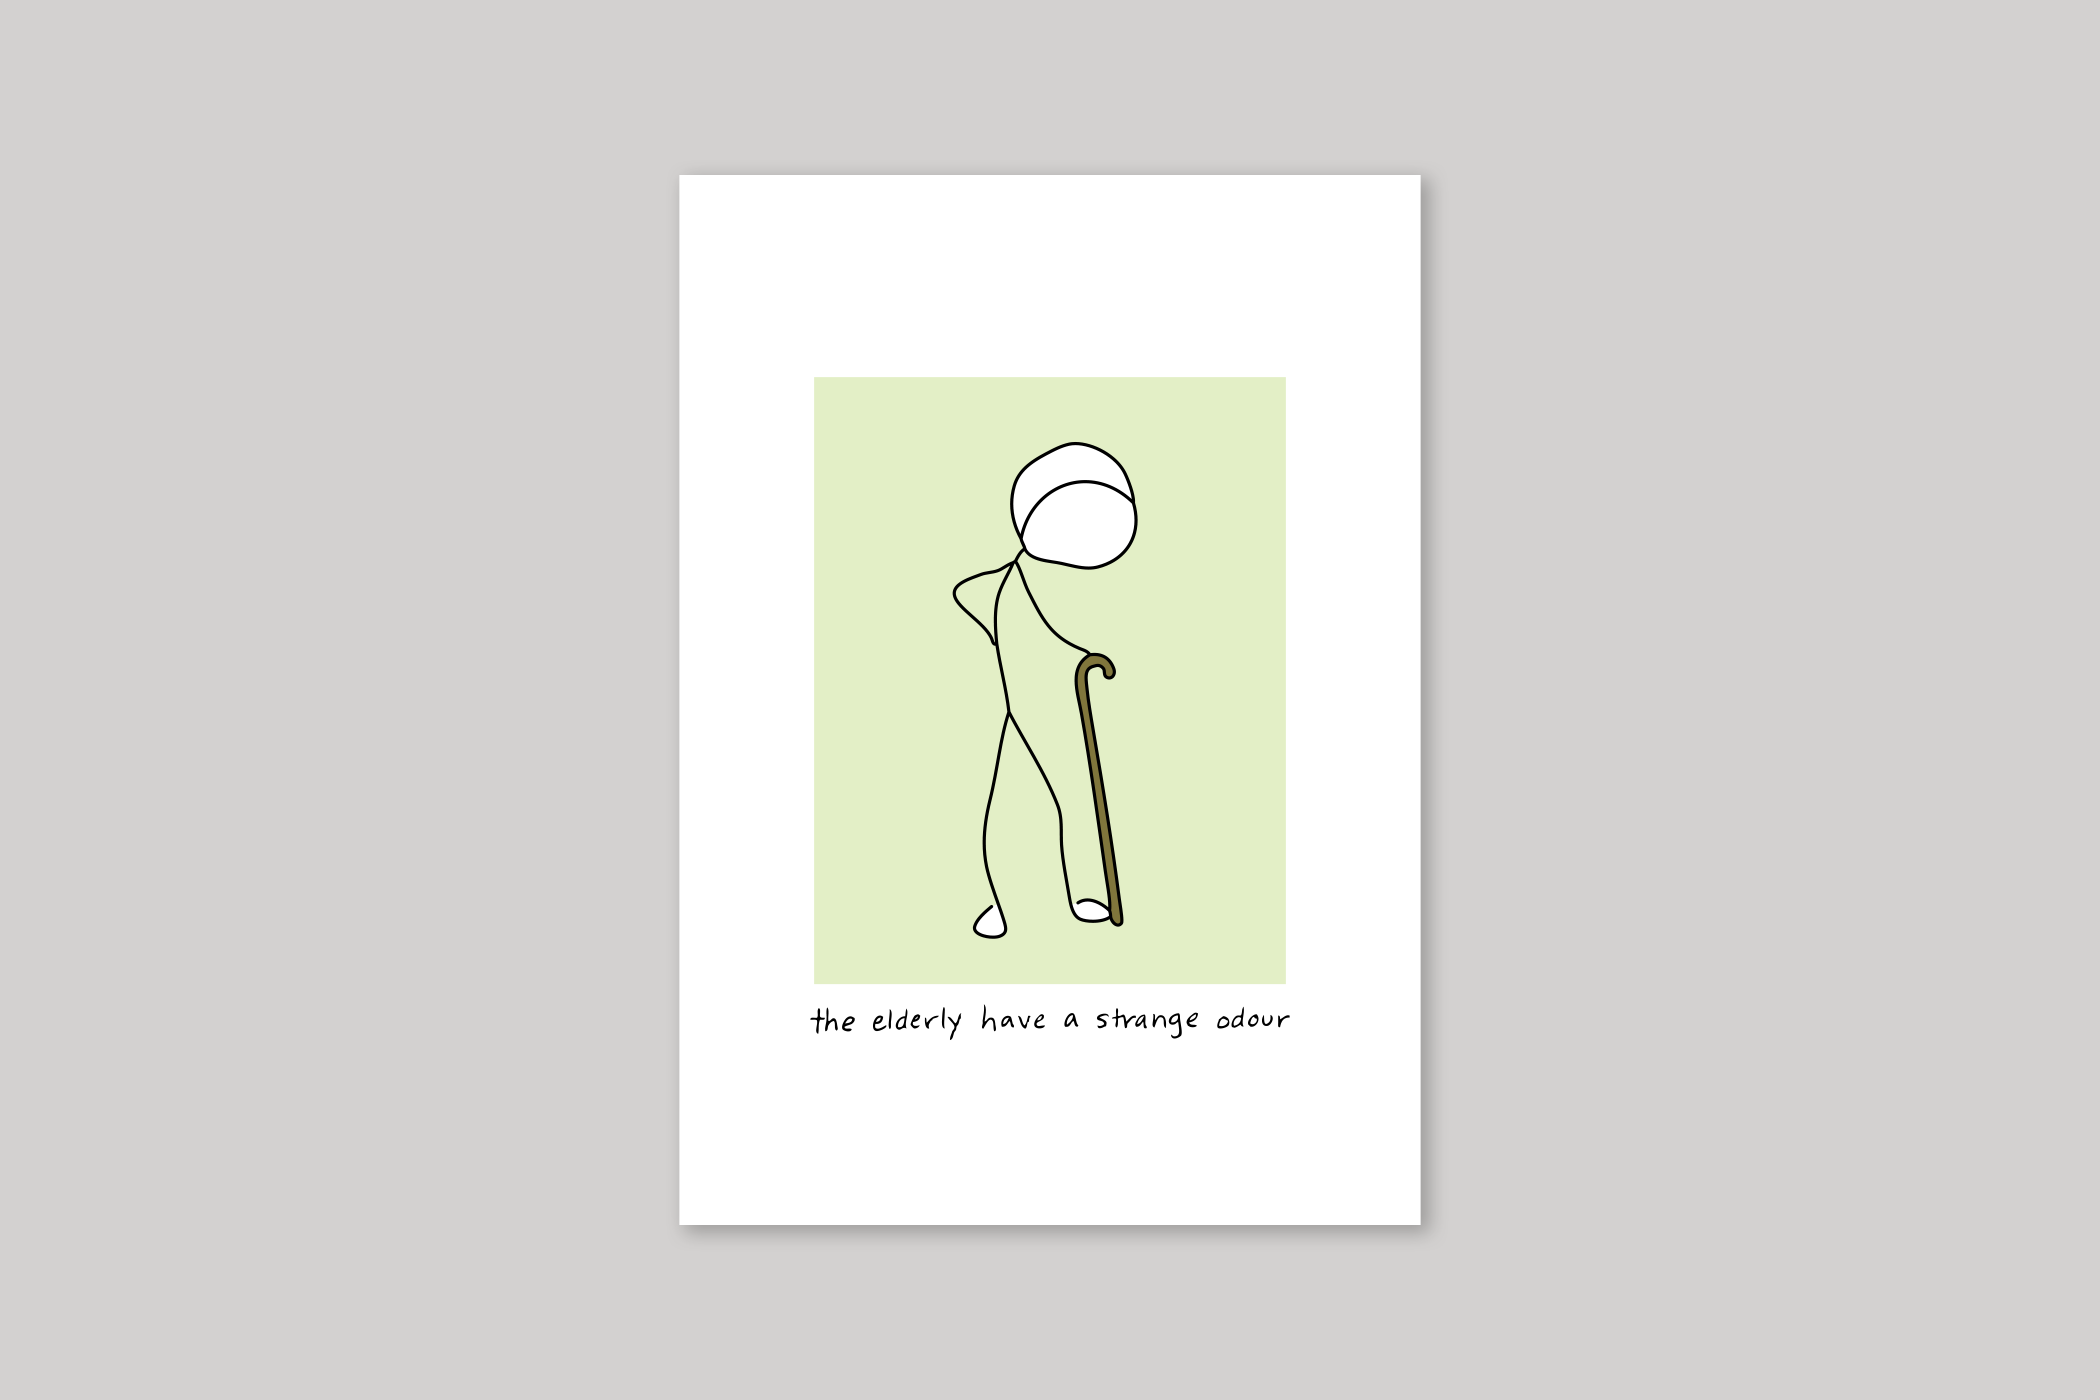 Strange Odour humorous illustration from Mean Cards range of greeting cards by Icon.